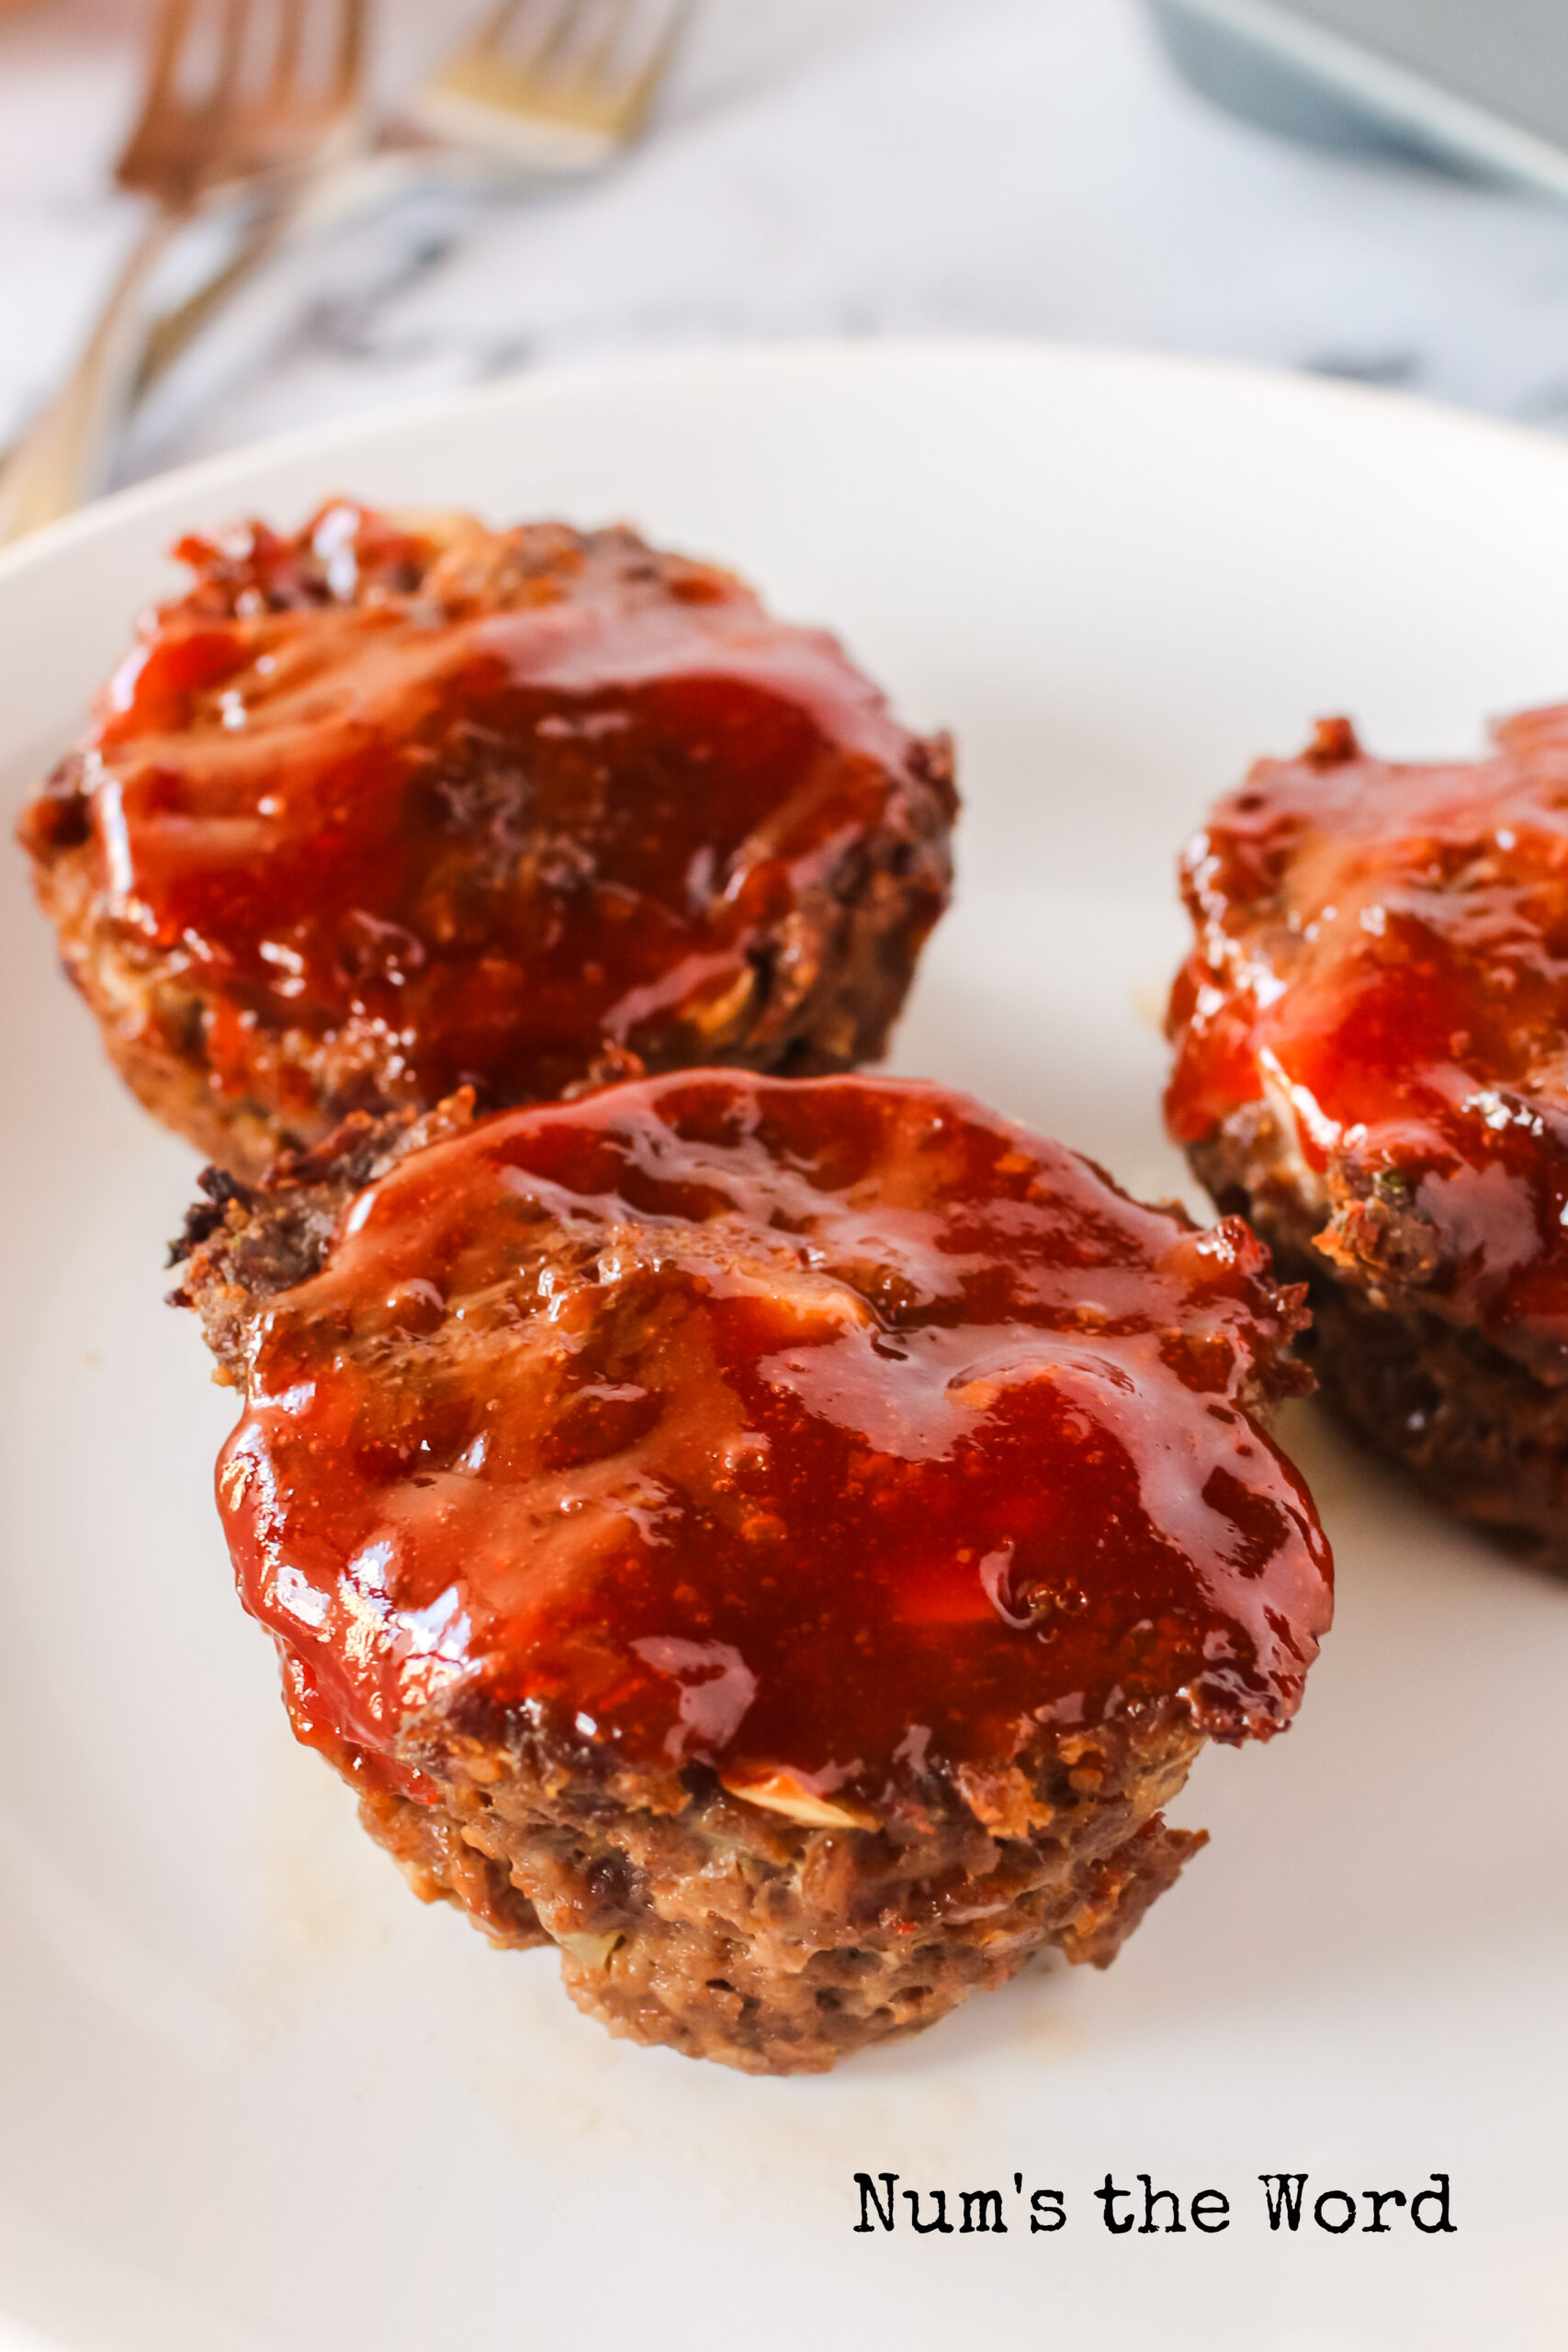 Top side view of meatloaf on a plate.